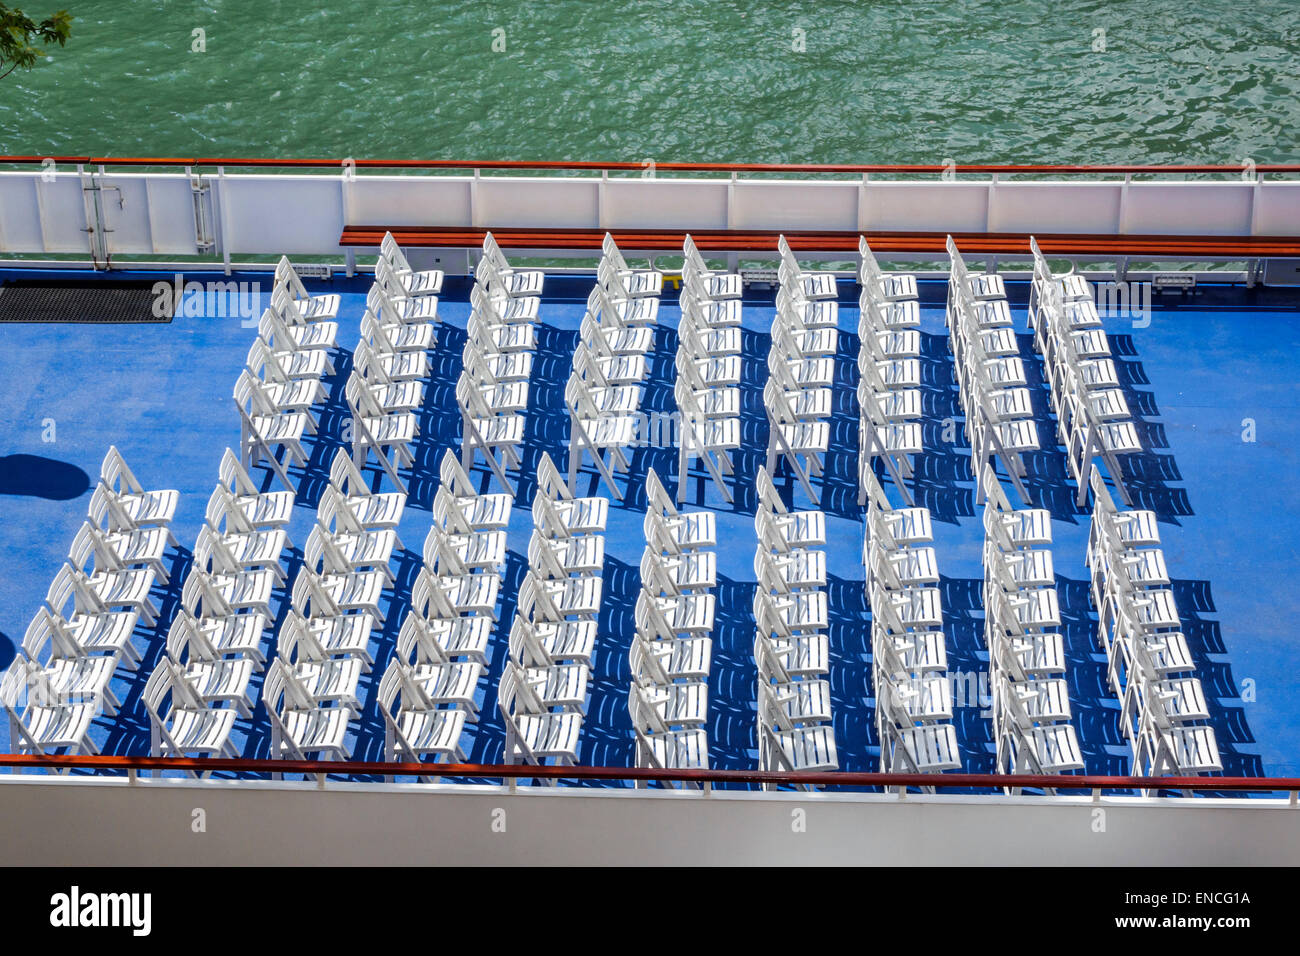 Chicago Illinois,Chicago River,boat,tour boat,upper deck,chairs,rows,organized,align,water,blue,white,empty,IL140908023 Stock Photo